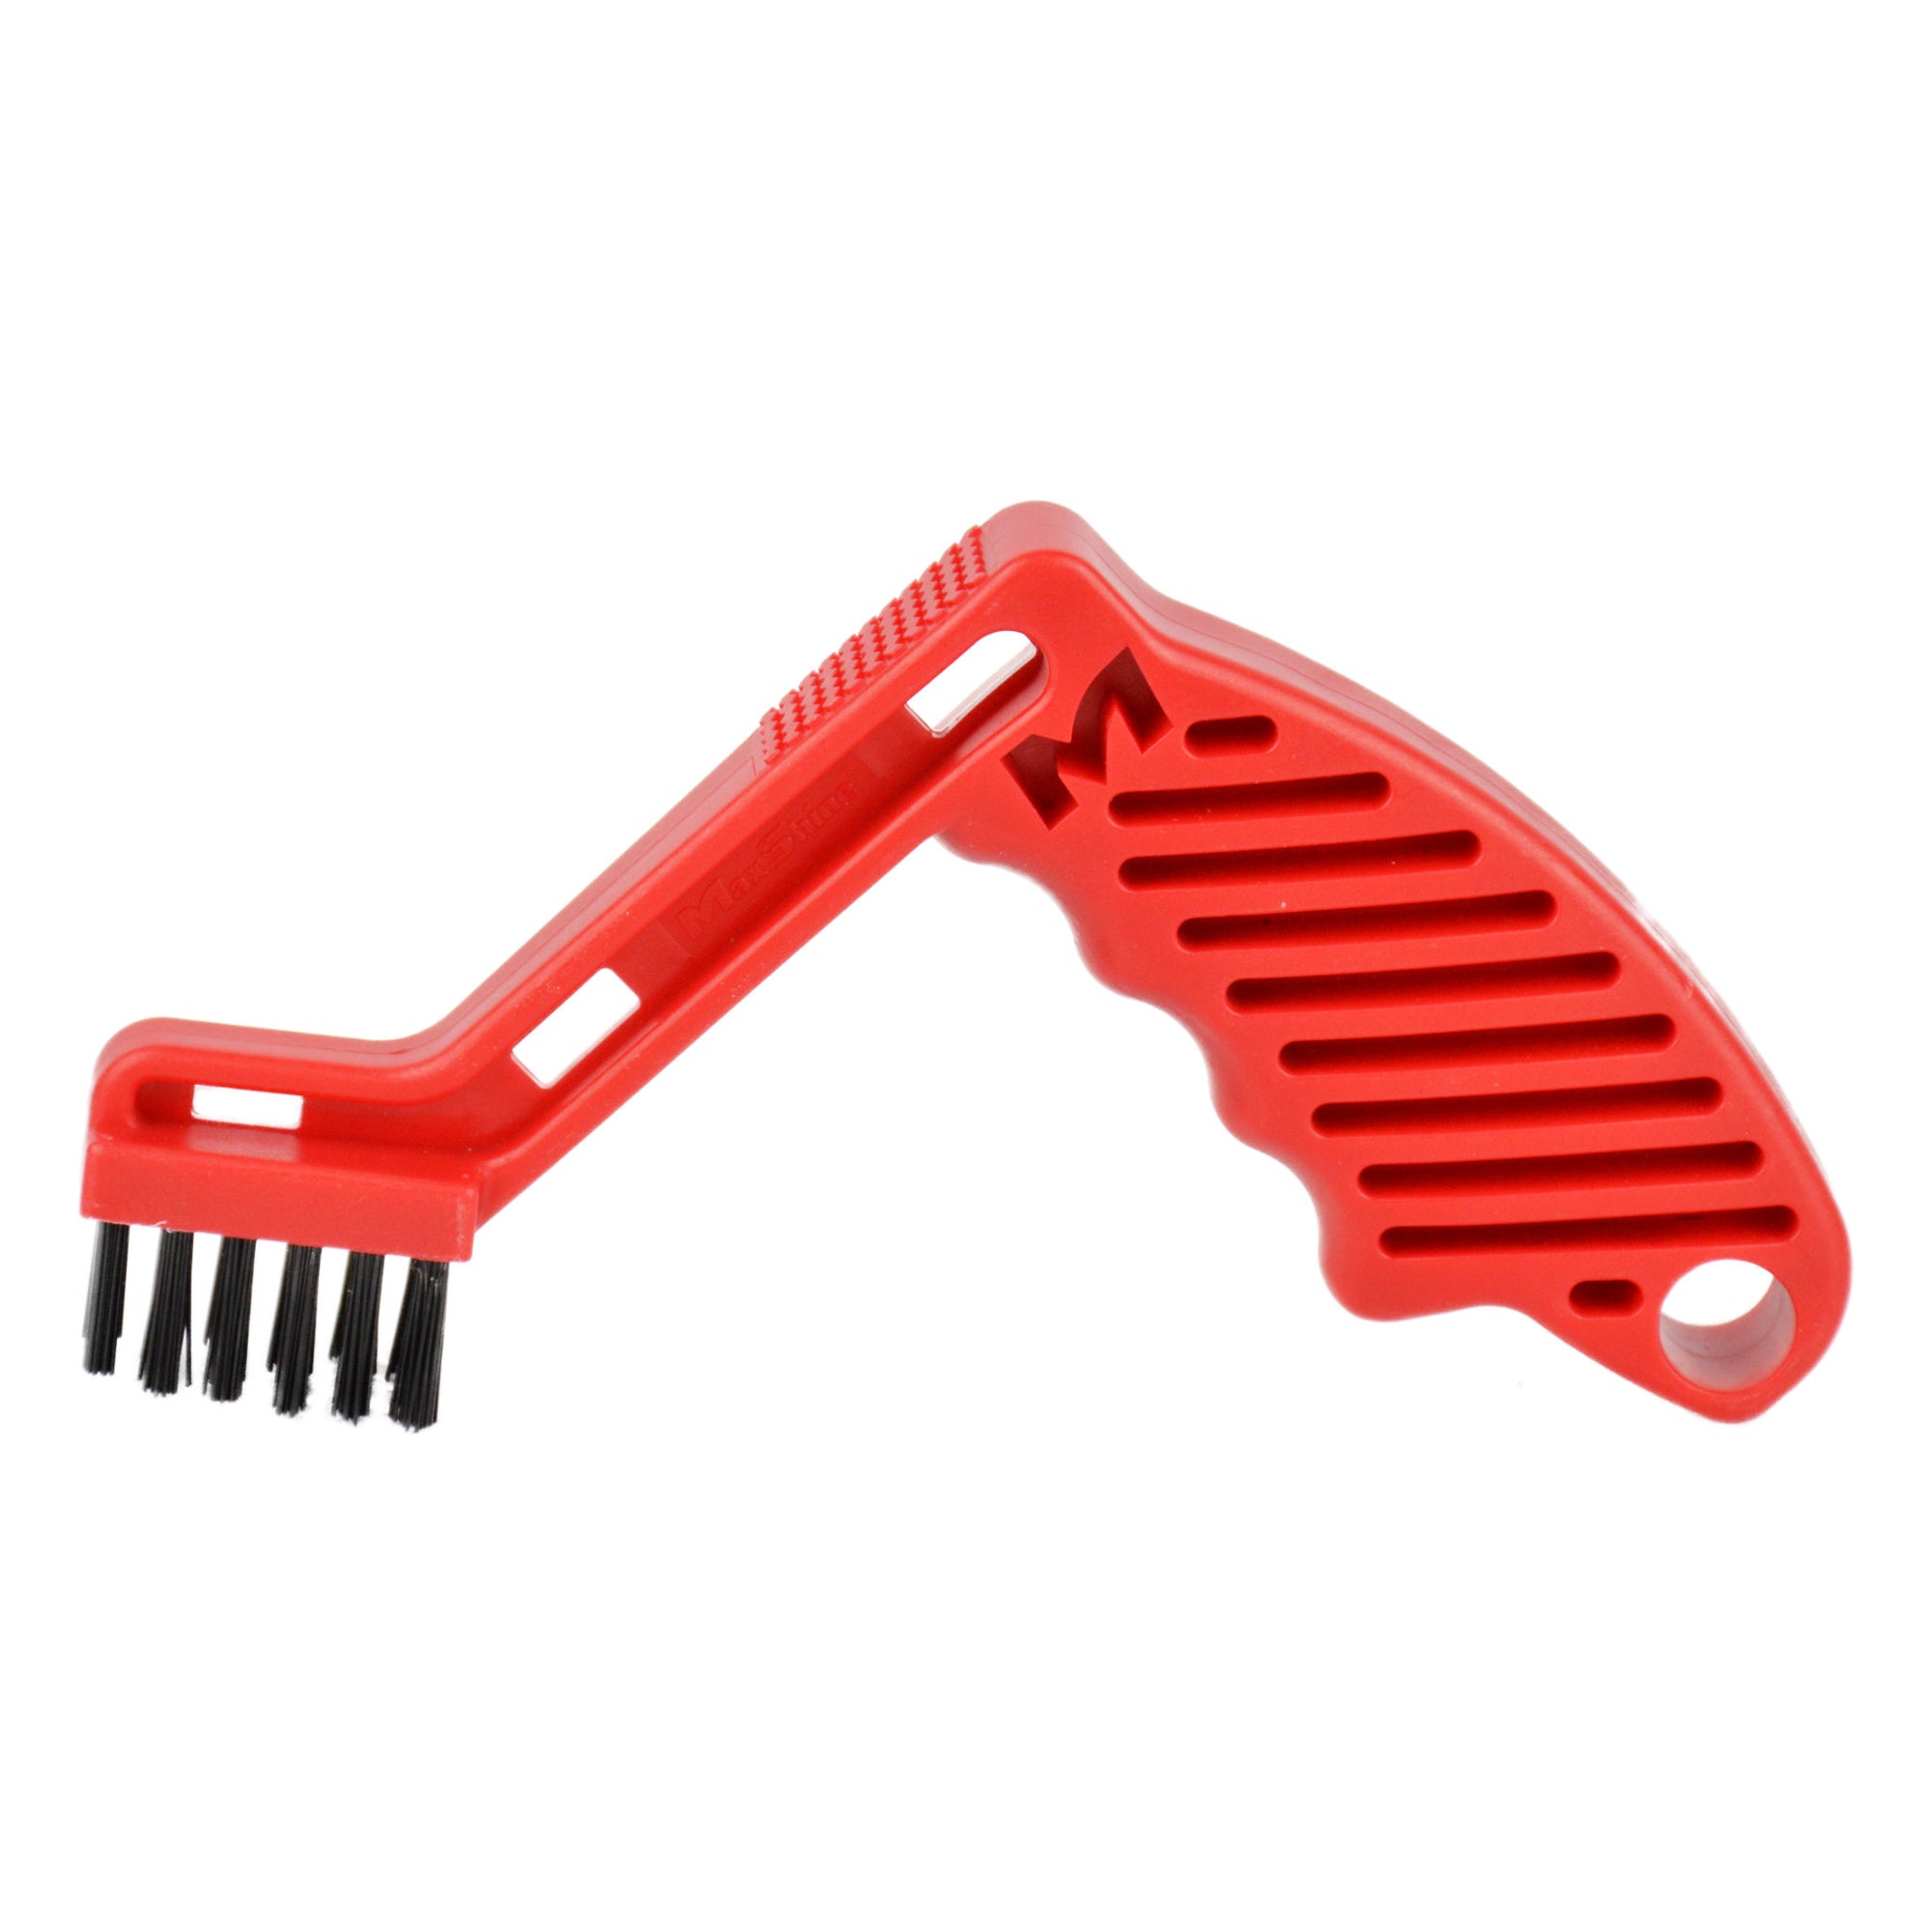 McKee's 37 Autoforge 10 inch Boar's Hair Wash Brush with Bumpers - Handle Available - No